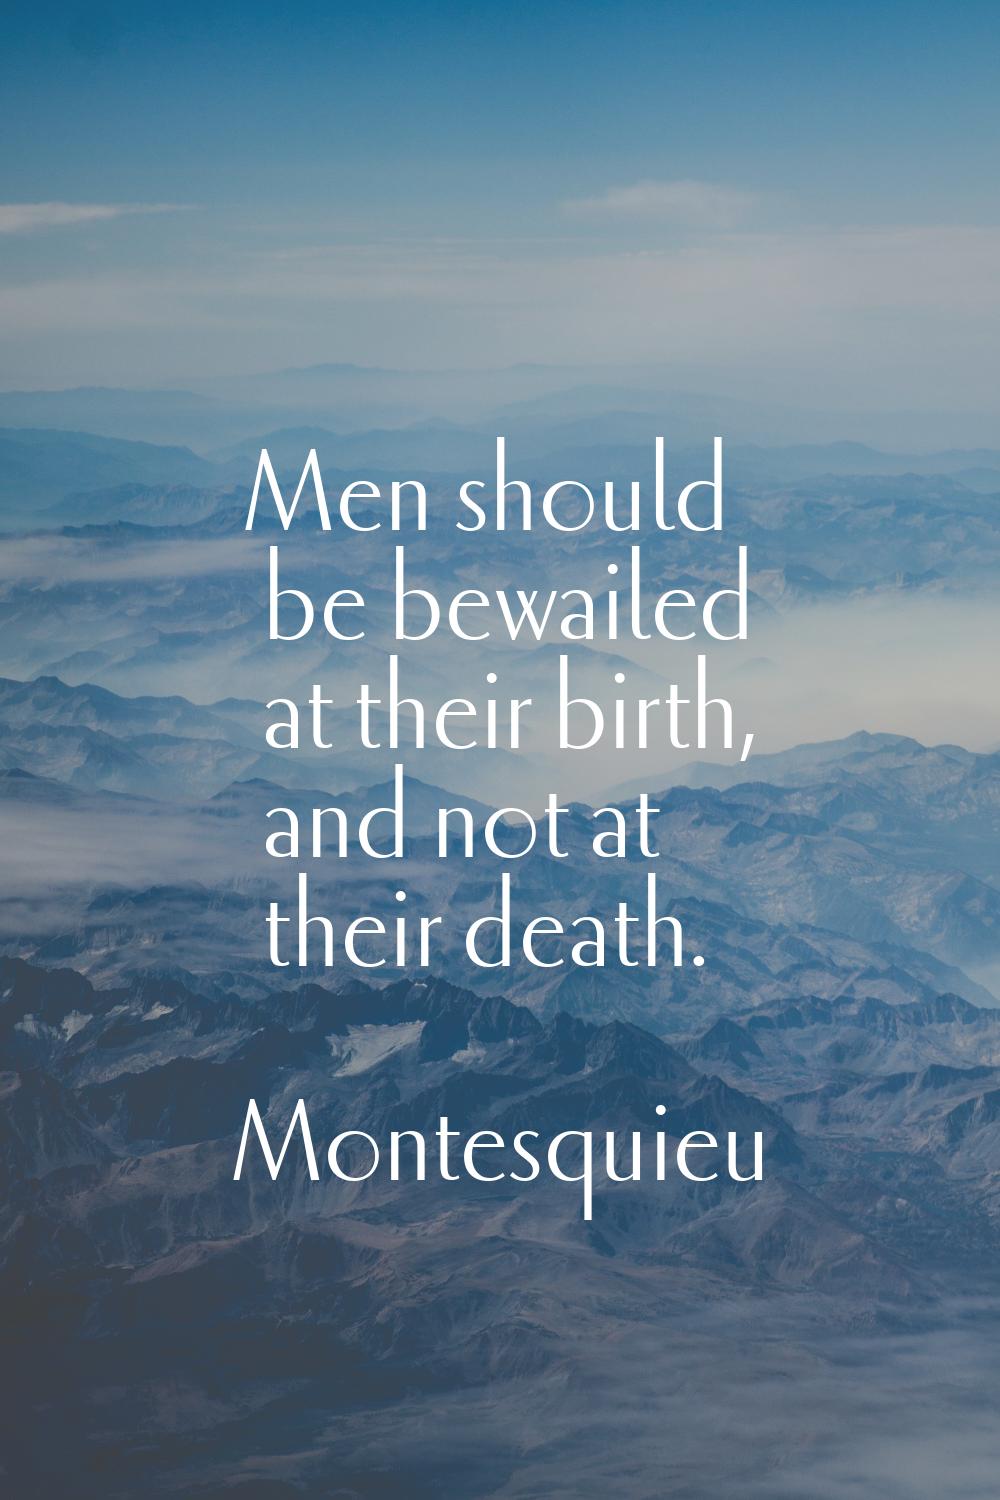 Men should be bewailed at their birth, and not at their death.